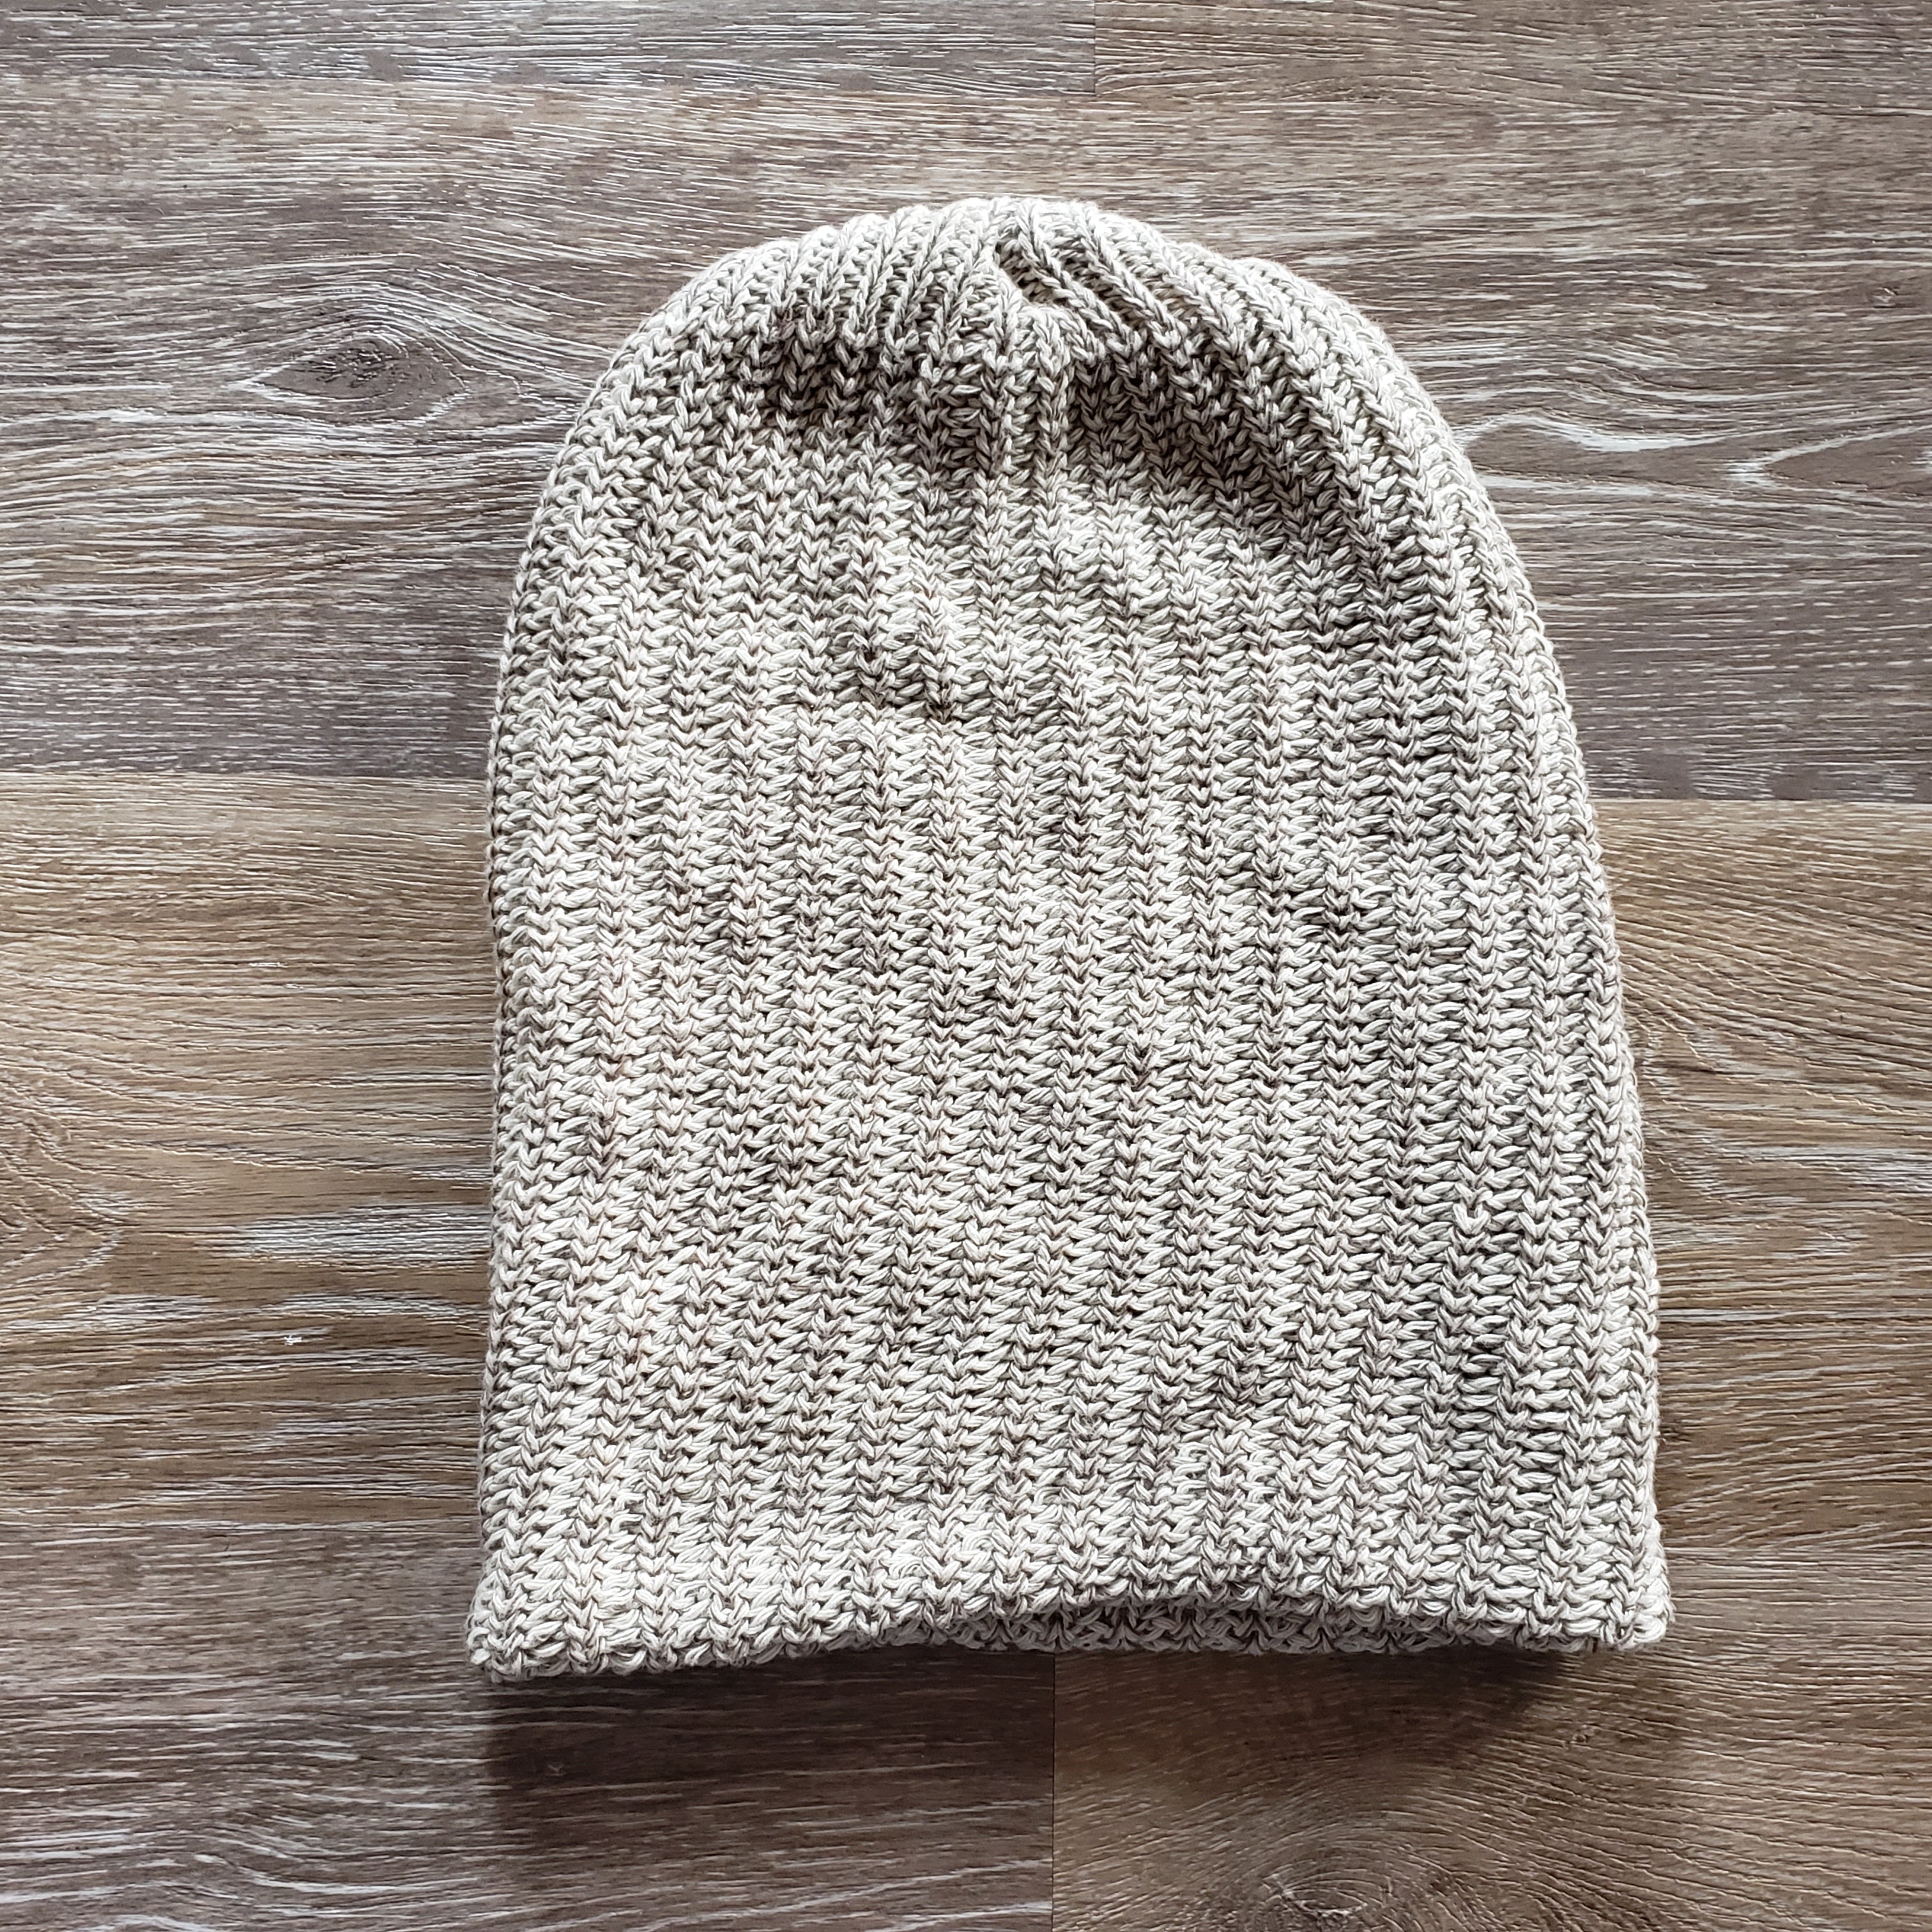 Heathered  Cotton Knit Beanie. Made in Portland Oregon.